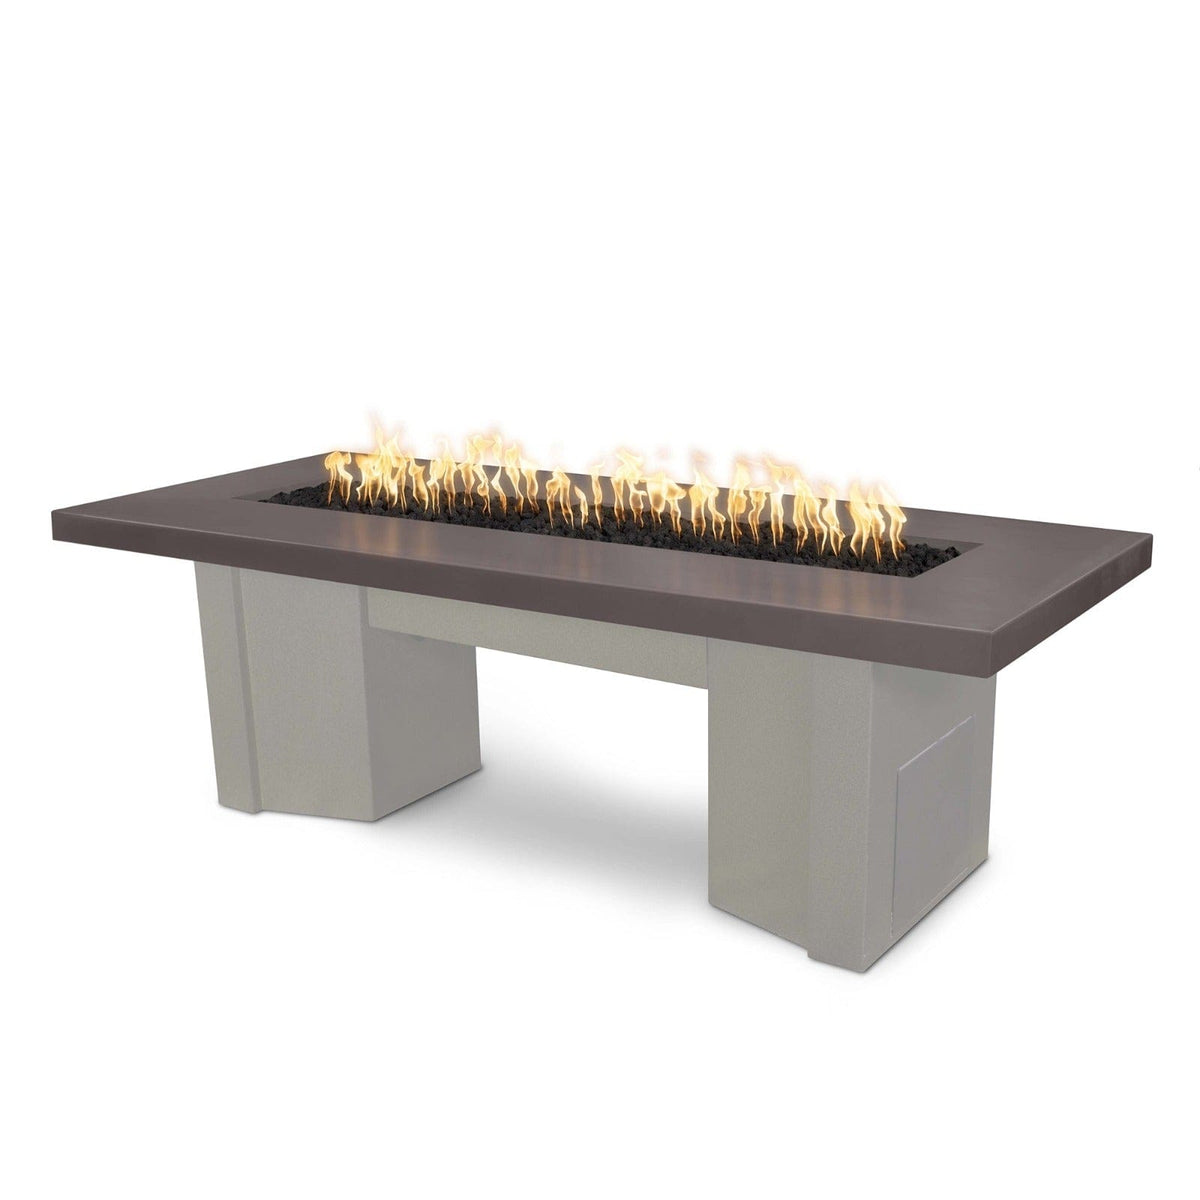 The Outdoor Plus Fire Features Chestnut (-CST) / Pewter Powder Coated Steel (-PEW) The Outdoor Plus 78&quot; Alameda Fire Table Smooth Concrete in Liquid Propane - 110V Plug &amp; Play Electronic Ignition / OPT-ALMGFRC78EKIT-LP